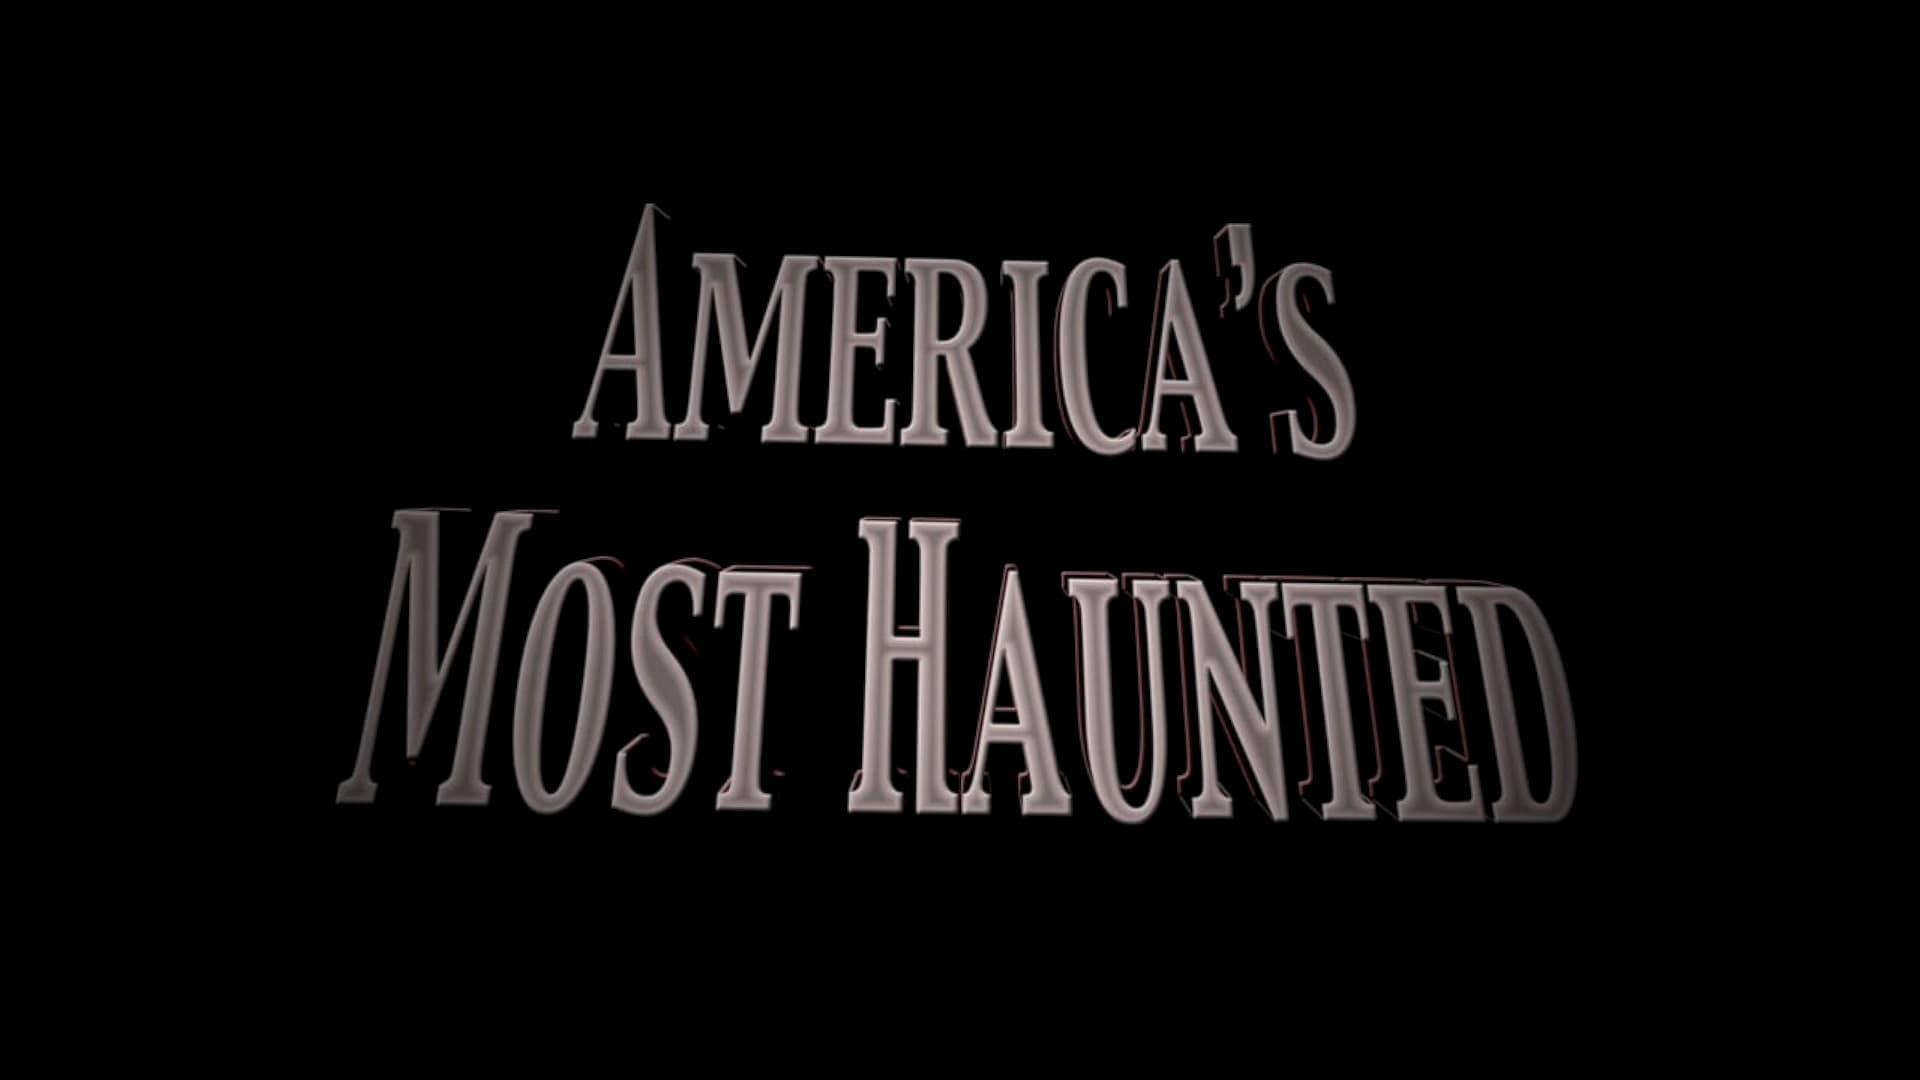 America's Most Haunted backdrop